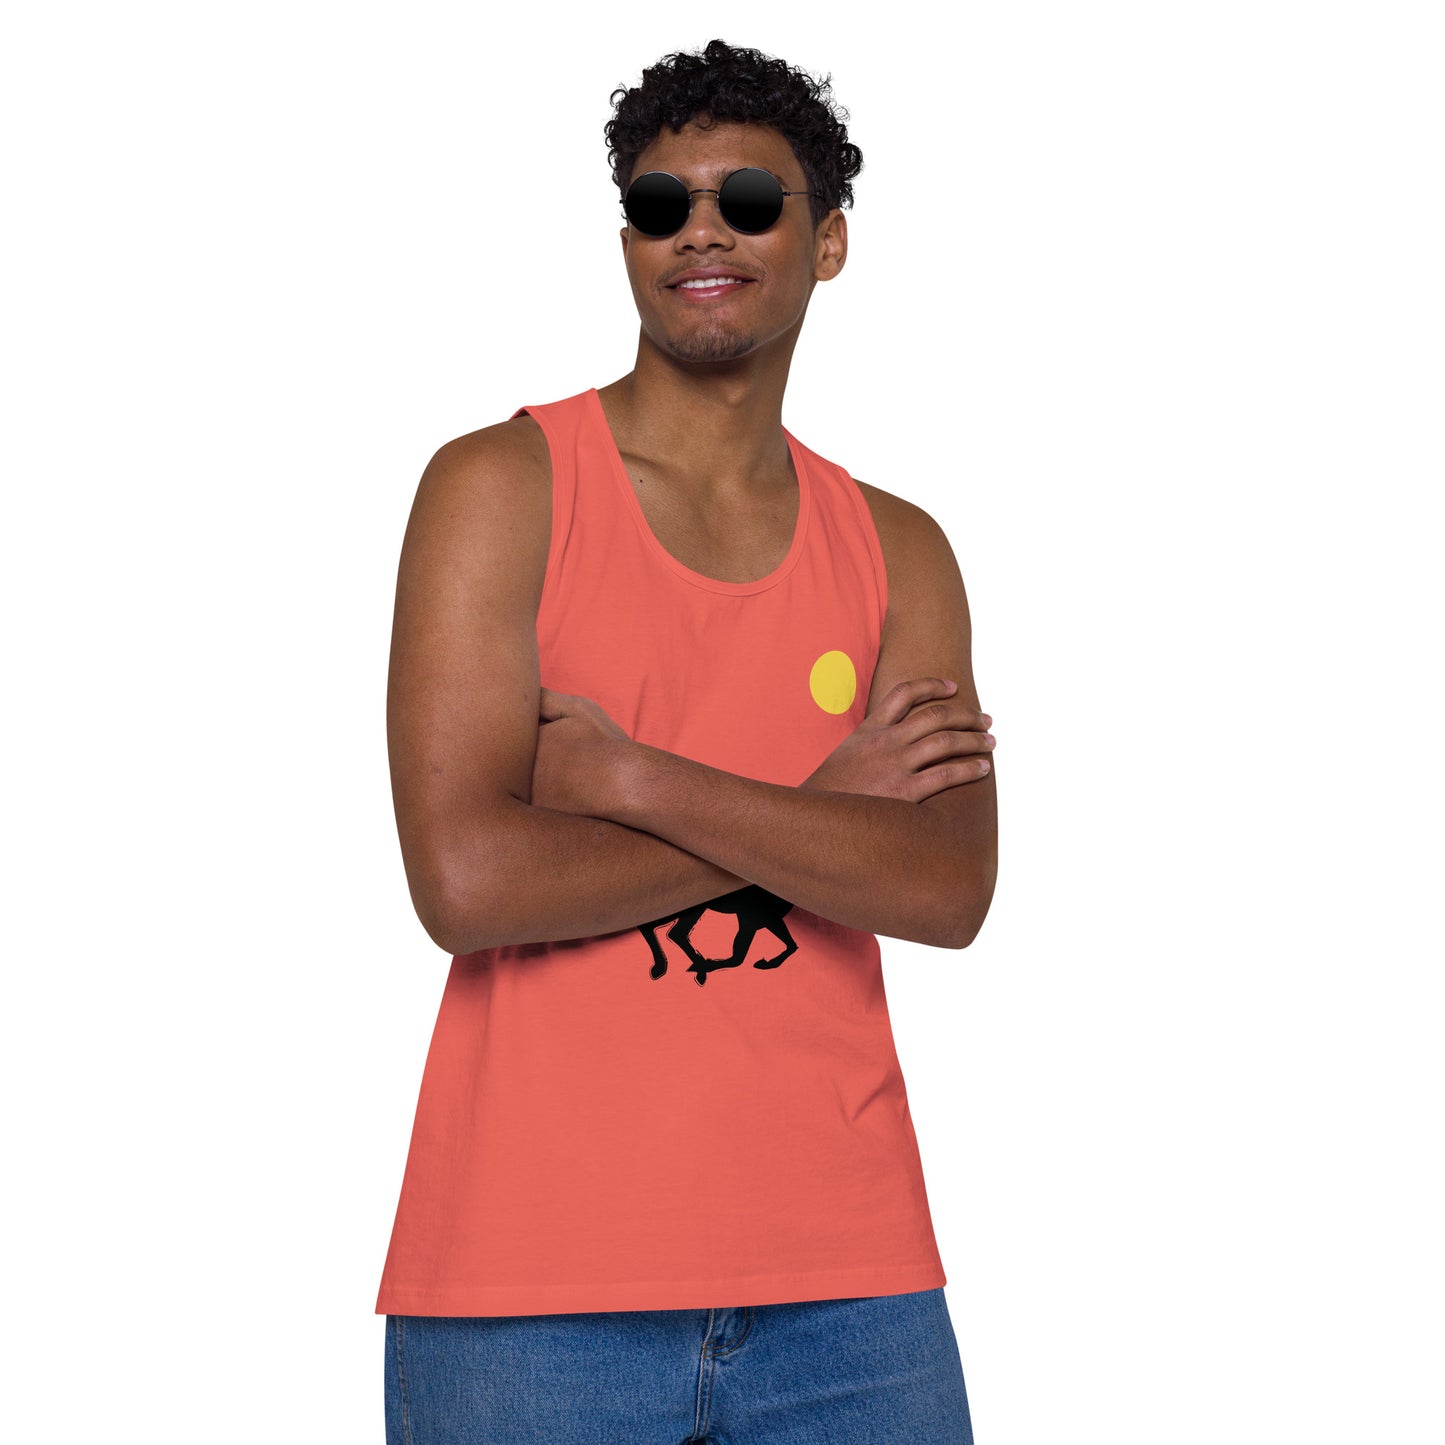 GIVE IT YOUR ALL Tee Premium Tank Top